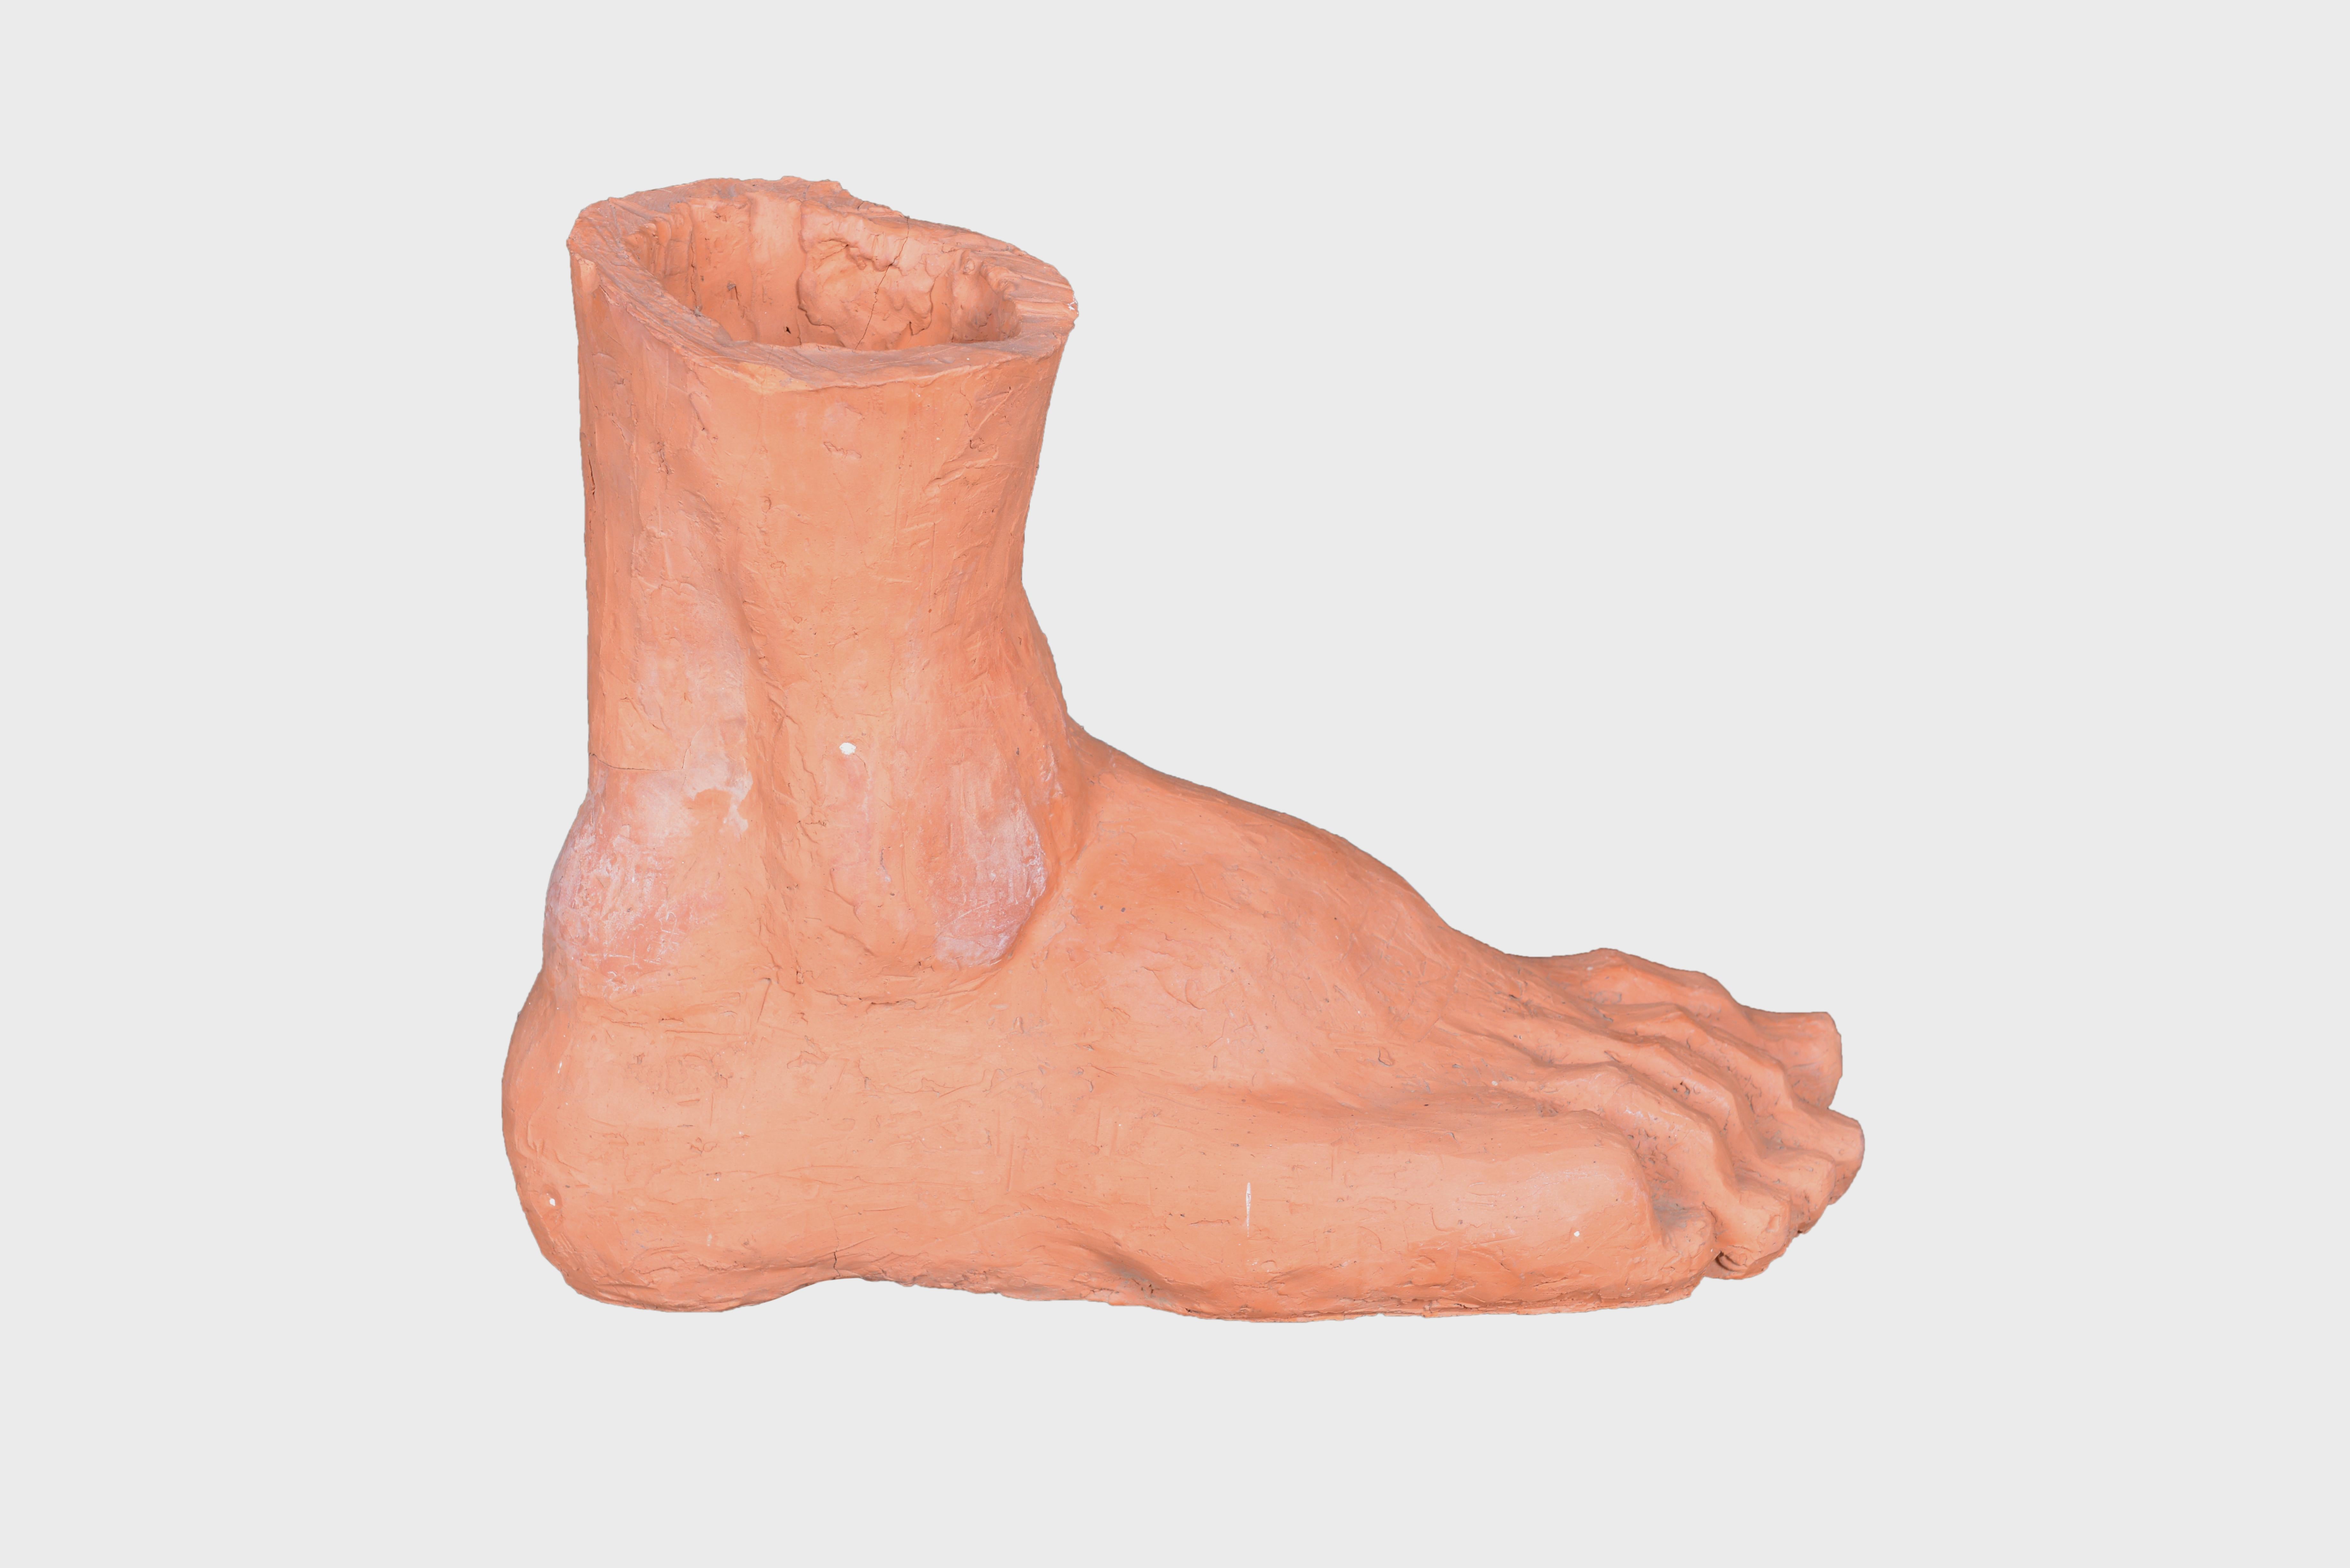 An oversized terracotta foot modelled in the classical Greco-Roman taste.